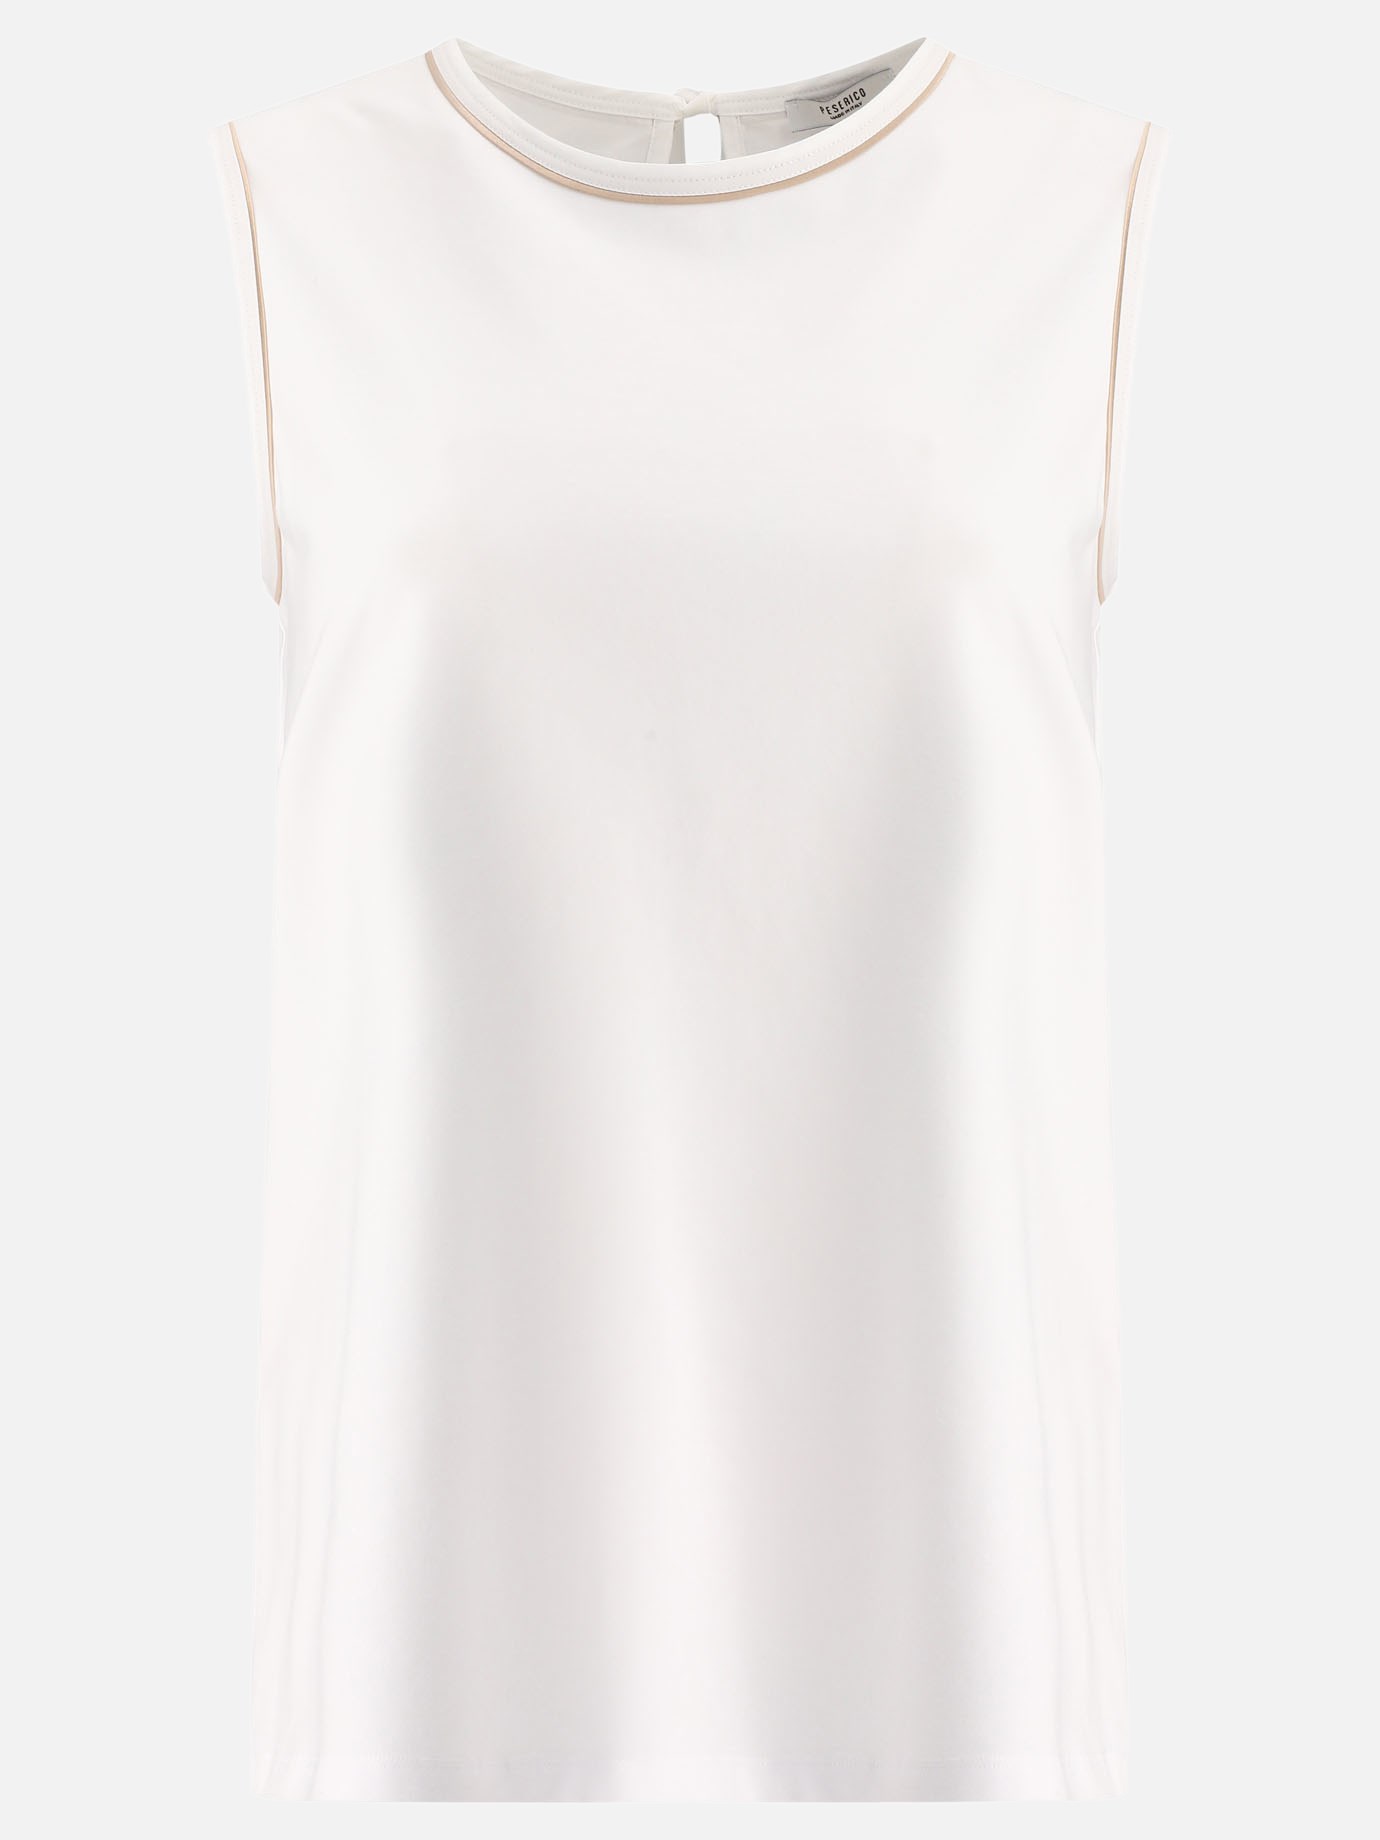 Sleeveless top with cut-out